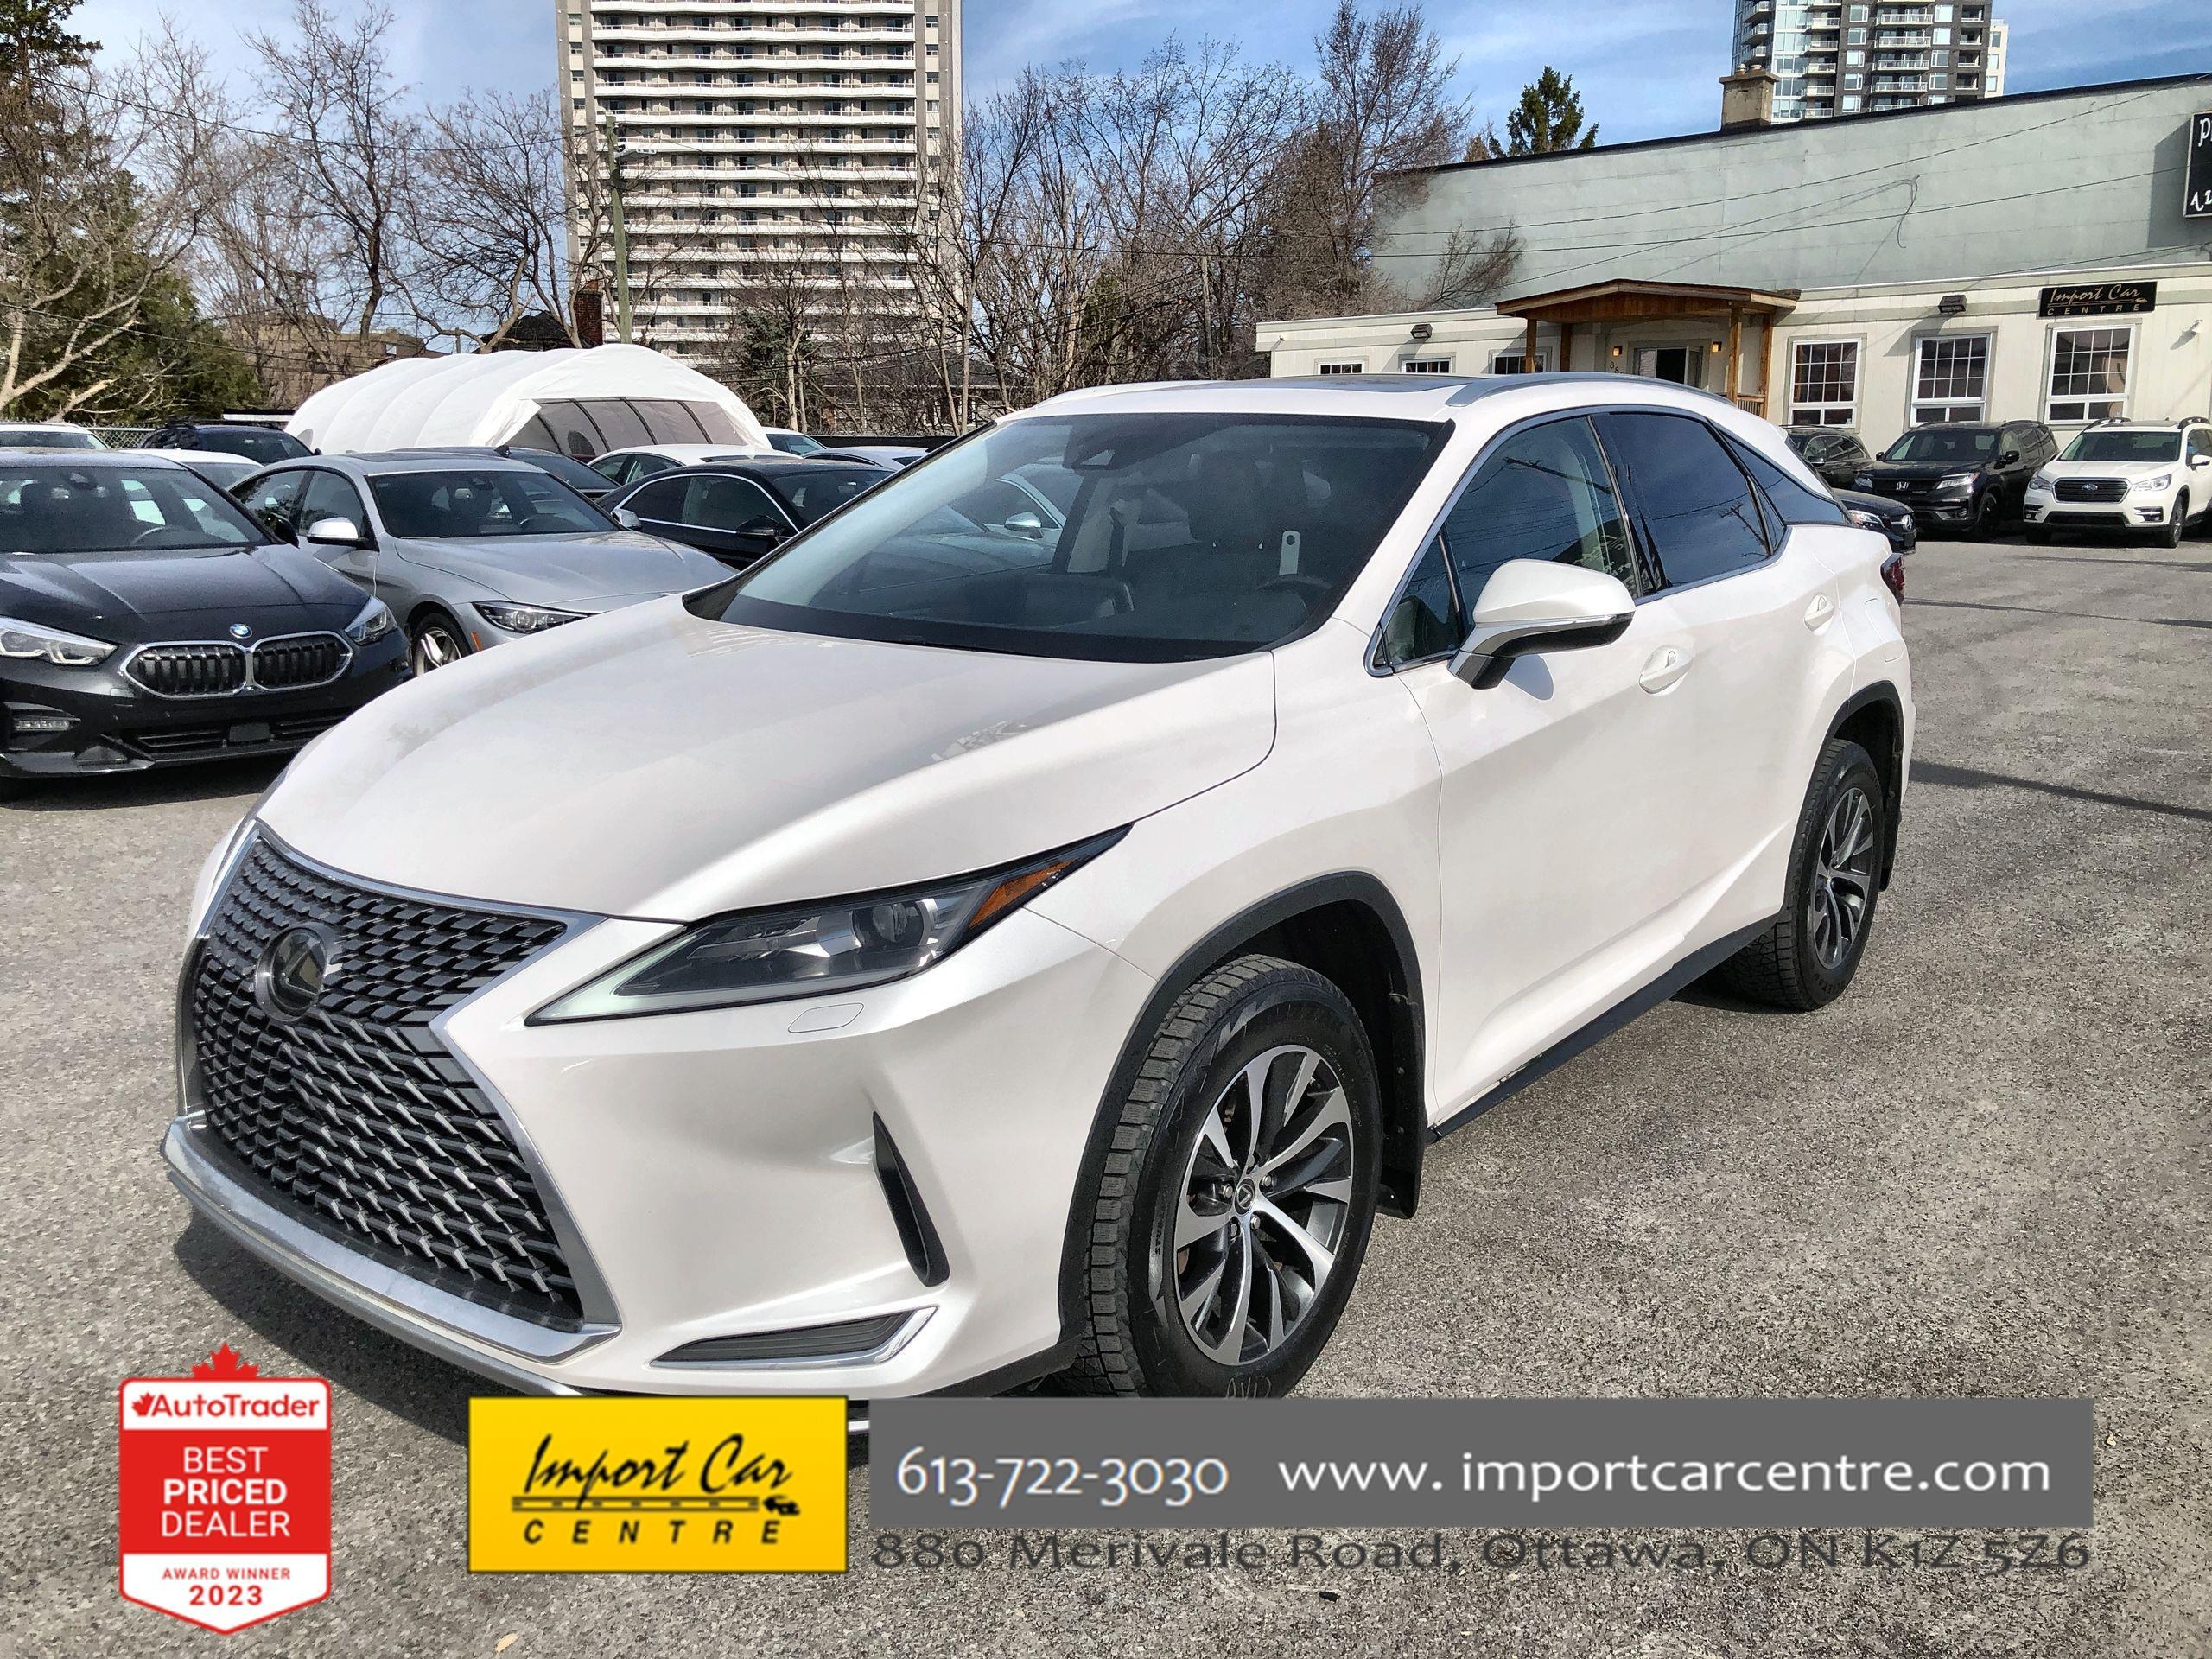 2020 Lexus RX 350 LEATHER, ROOF, HTD. & COOLED SEATS, HTD. STEER